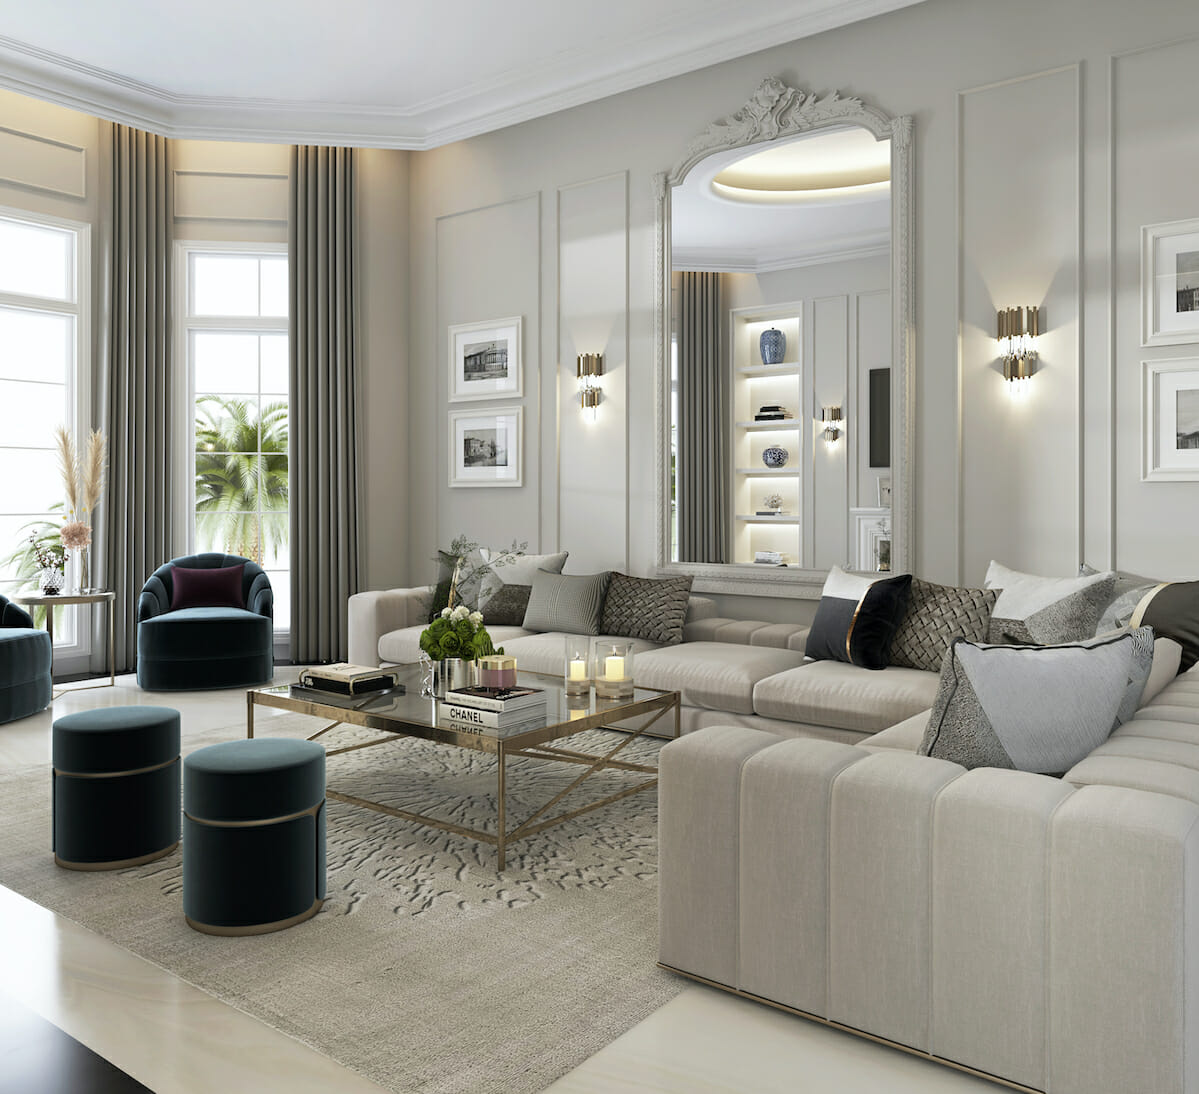 Luxury Home Decor: Elegant Ideas for Your Space